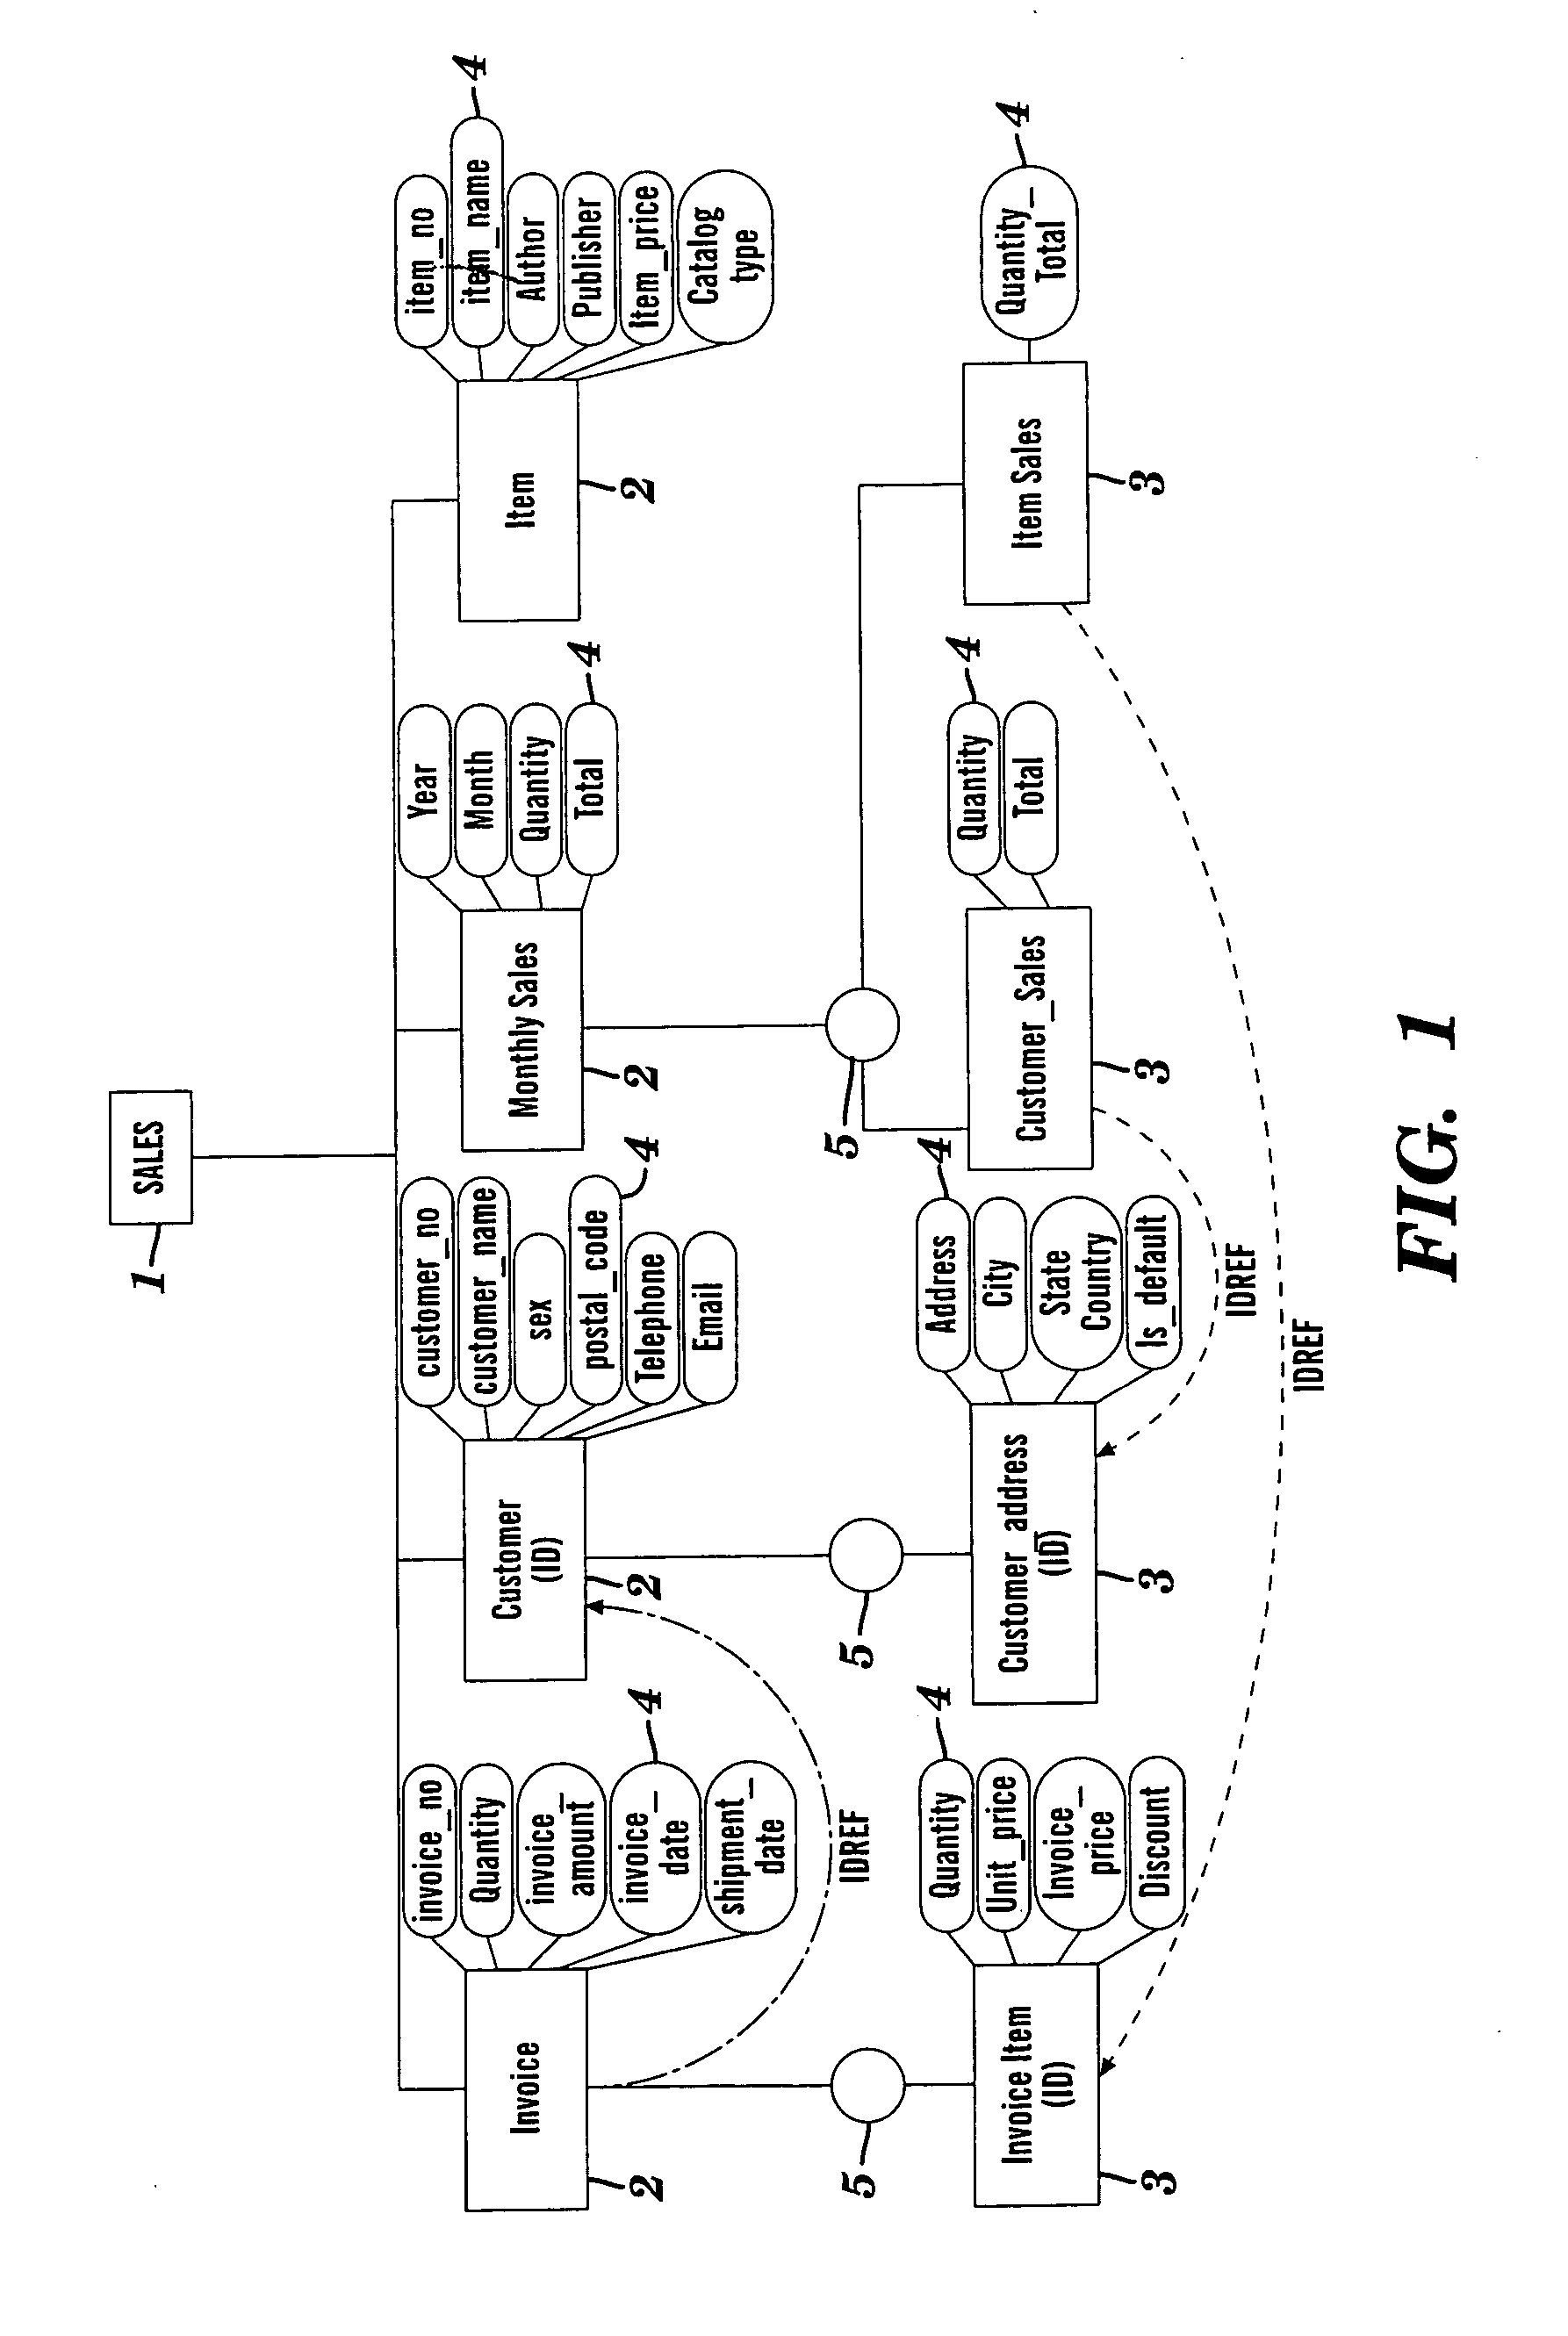 System and method of translating a relational database into an XML document and vice versa